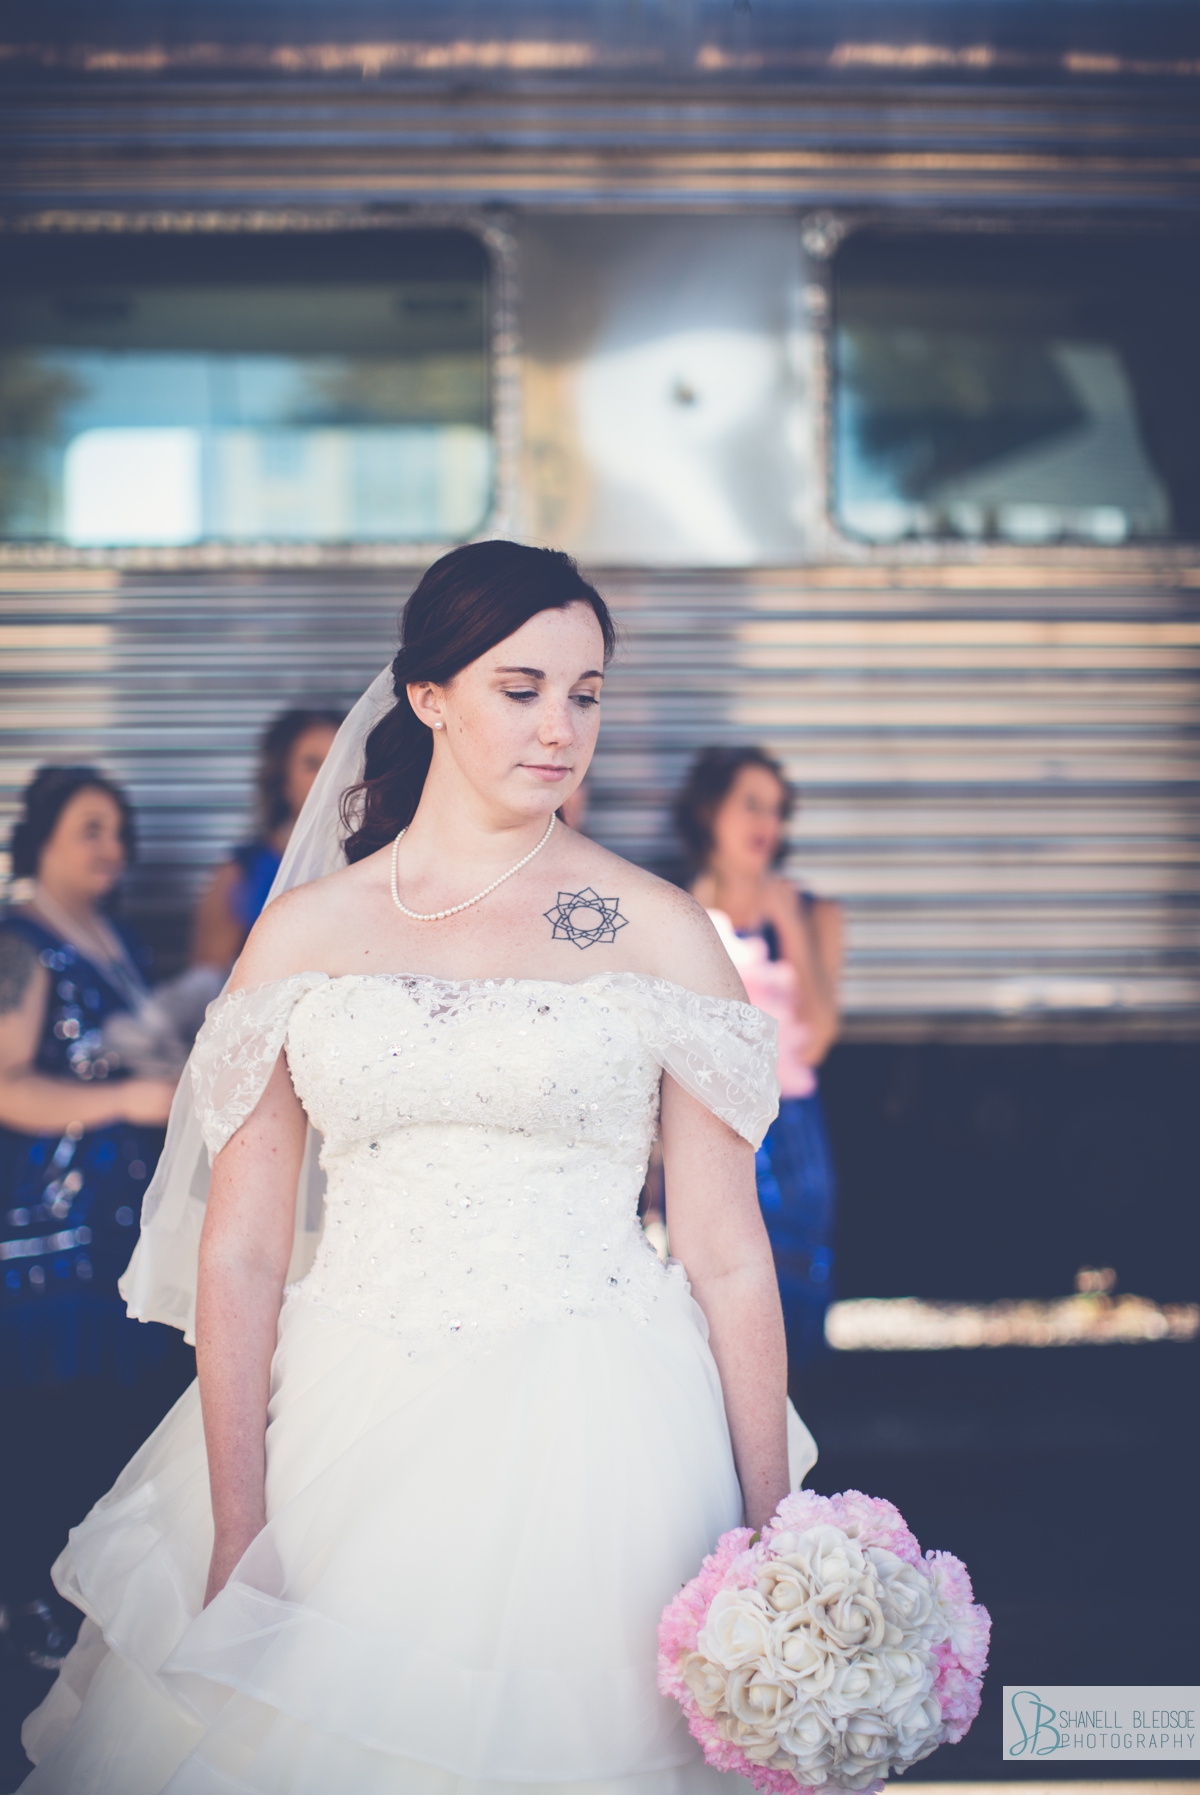 bride's portrait in front of silver train at historic southern railway station